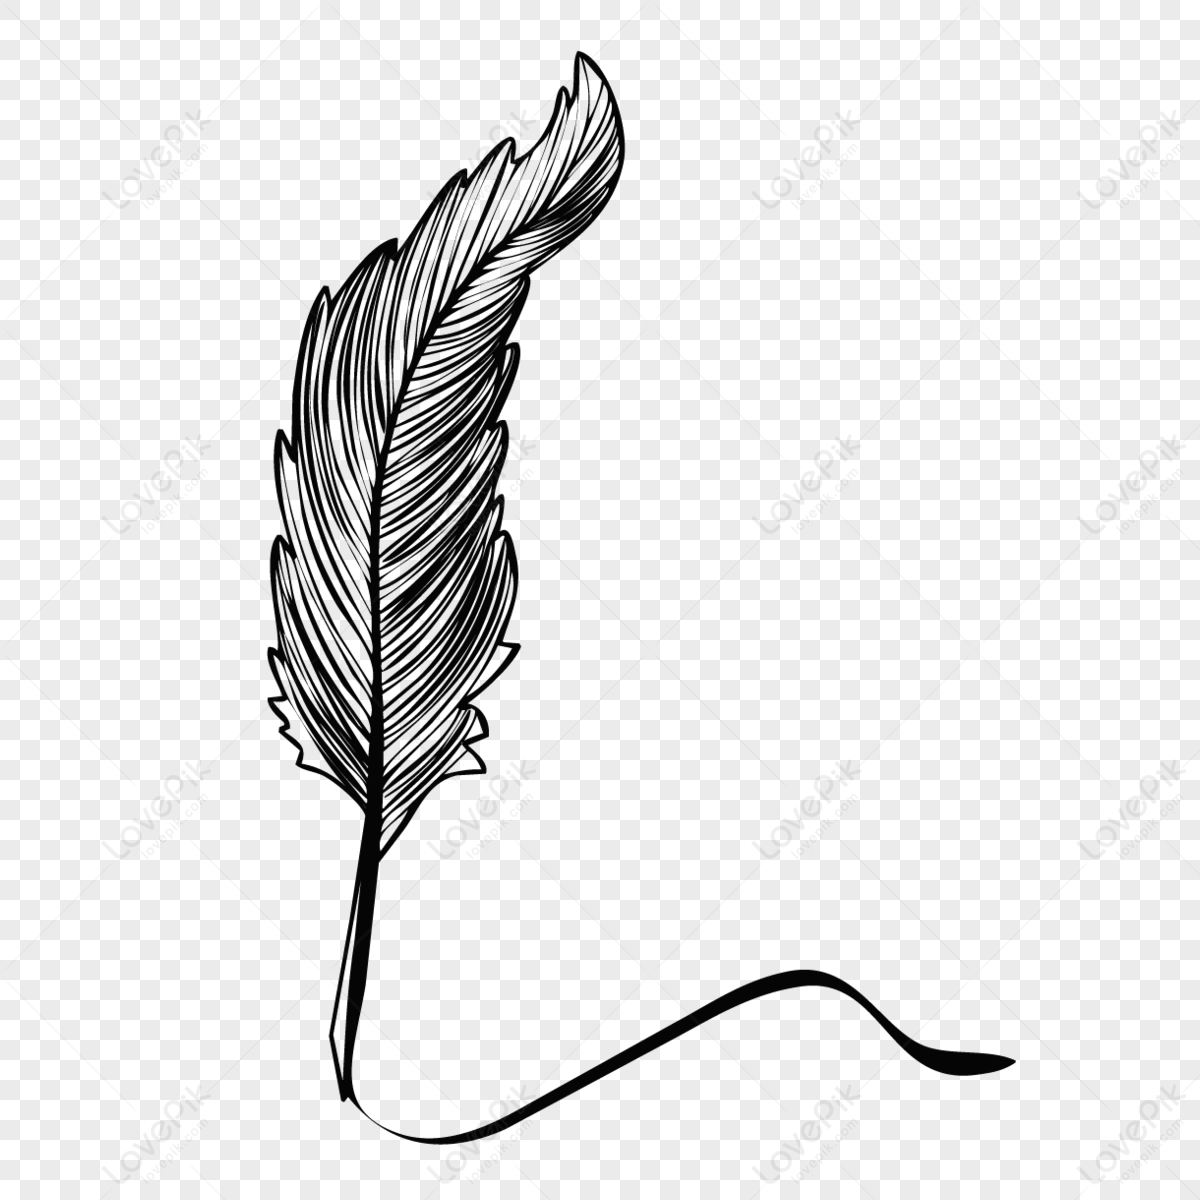 Cartoon hand drawn feather pen writing illustration,paint hand,hand painted png white transparent